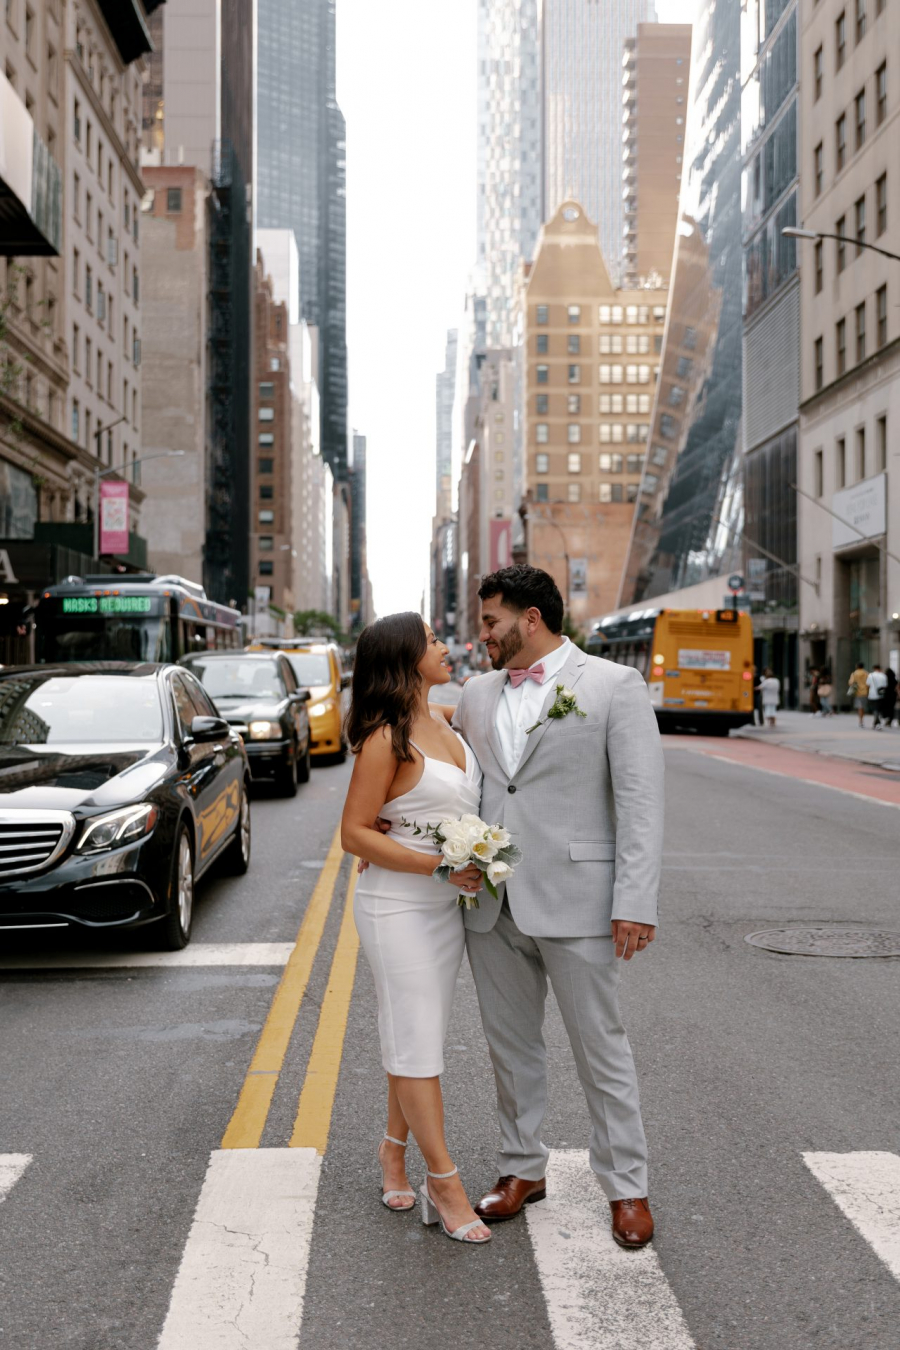 Simple wedding in Central Park NY 31